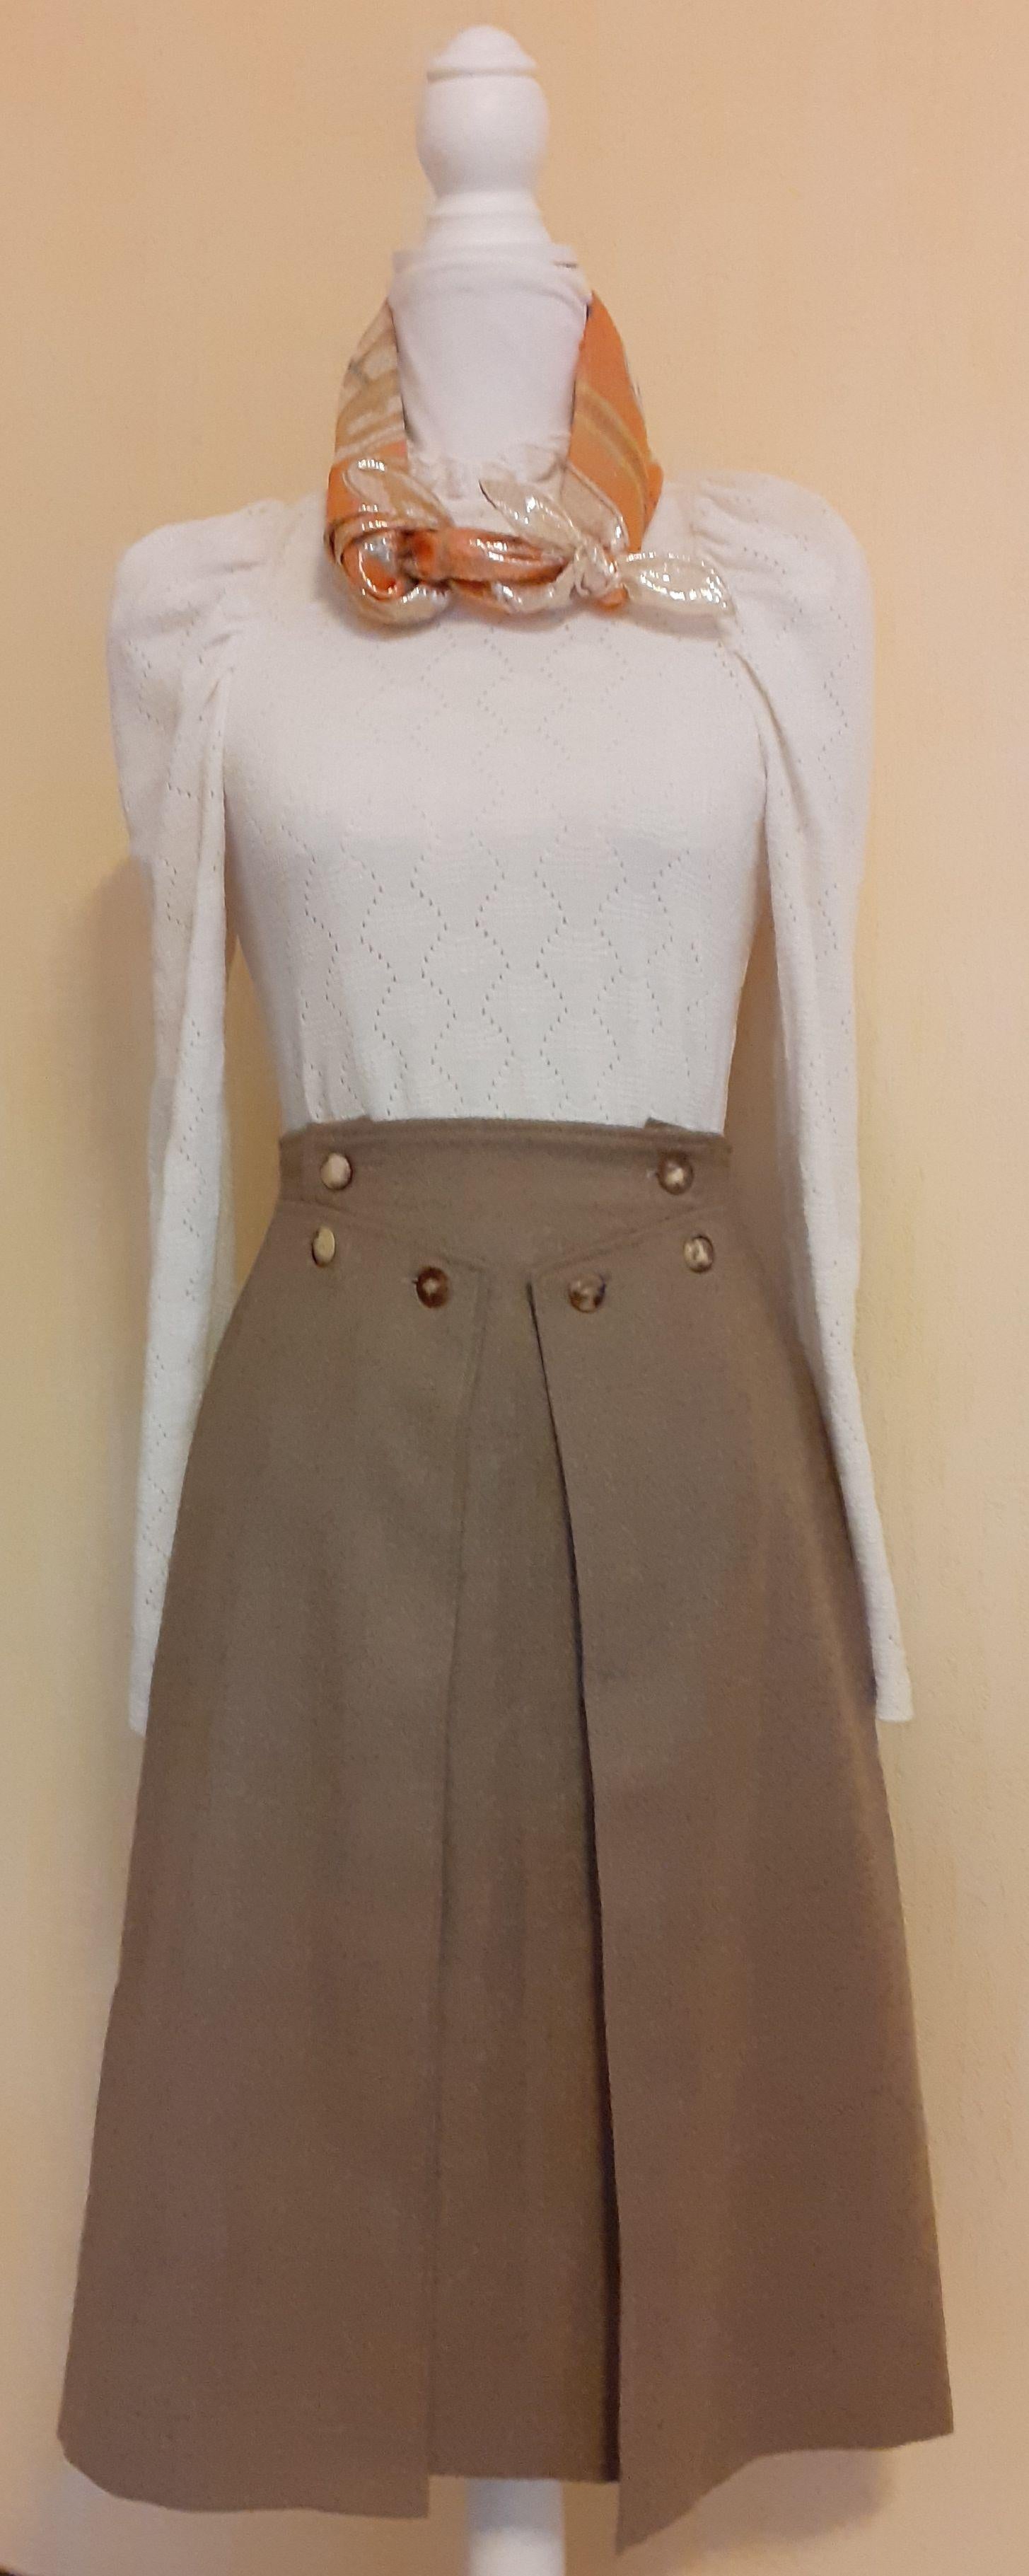 Hermès Wrap Skirt in Woll and Cashmere Size 36 Small For Sale 6